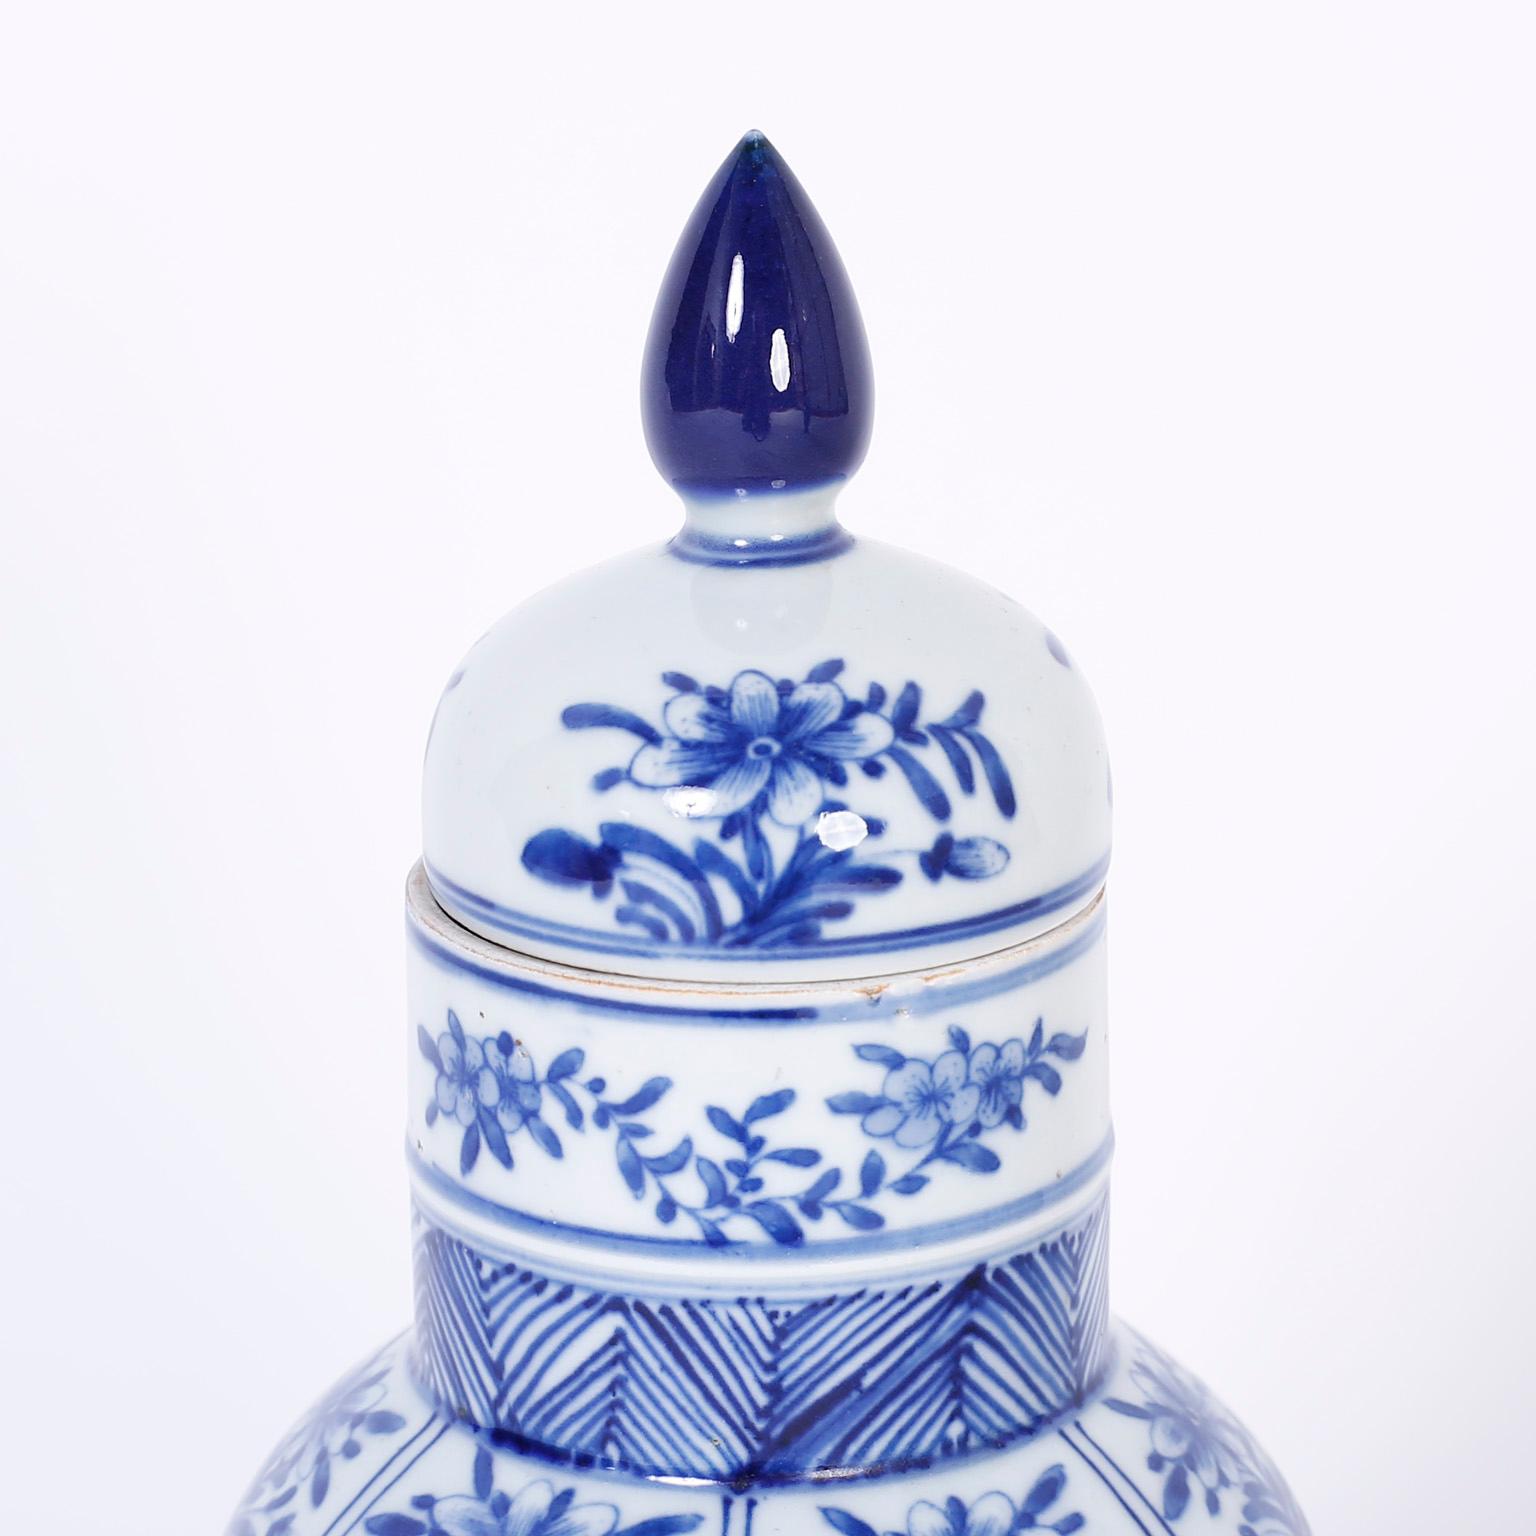 Chinoiserie Pair of Blue and White Chinese Porcelain Lidded Urns